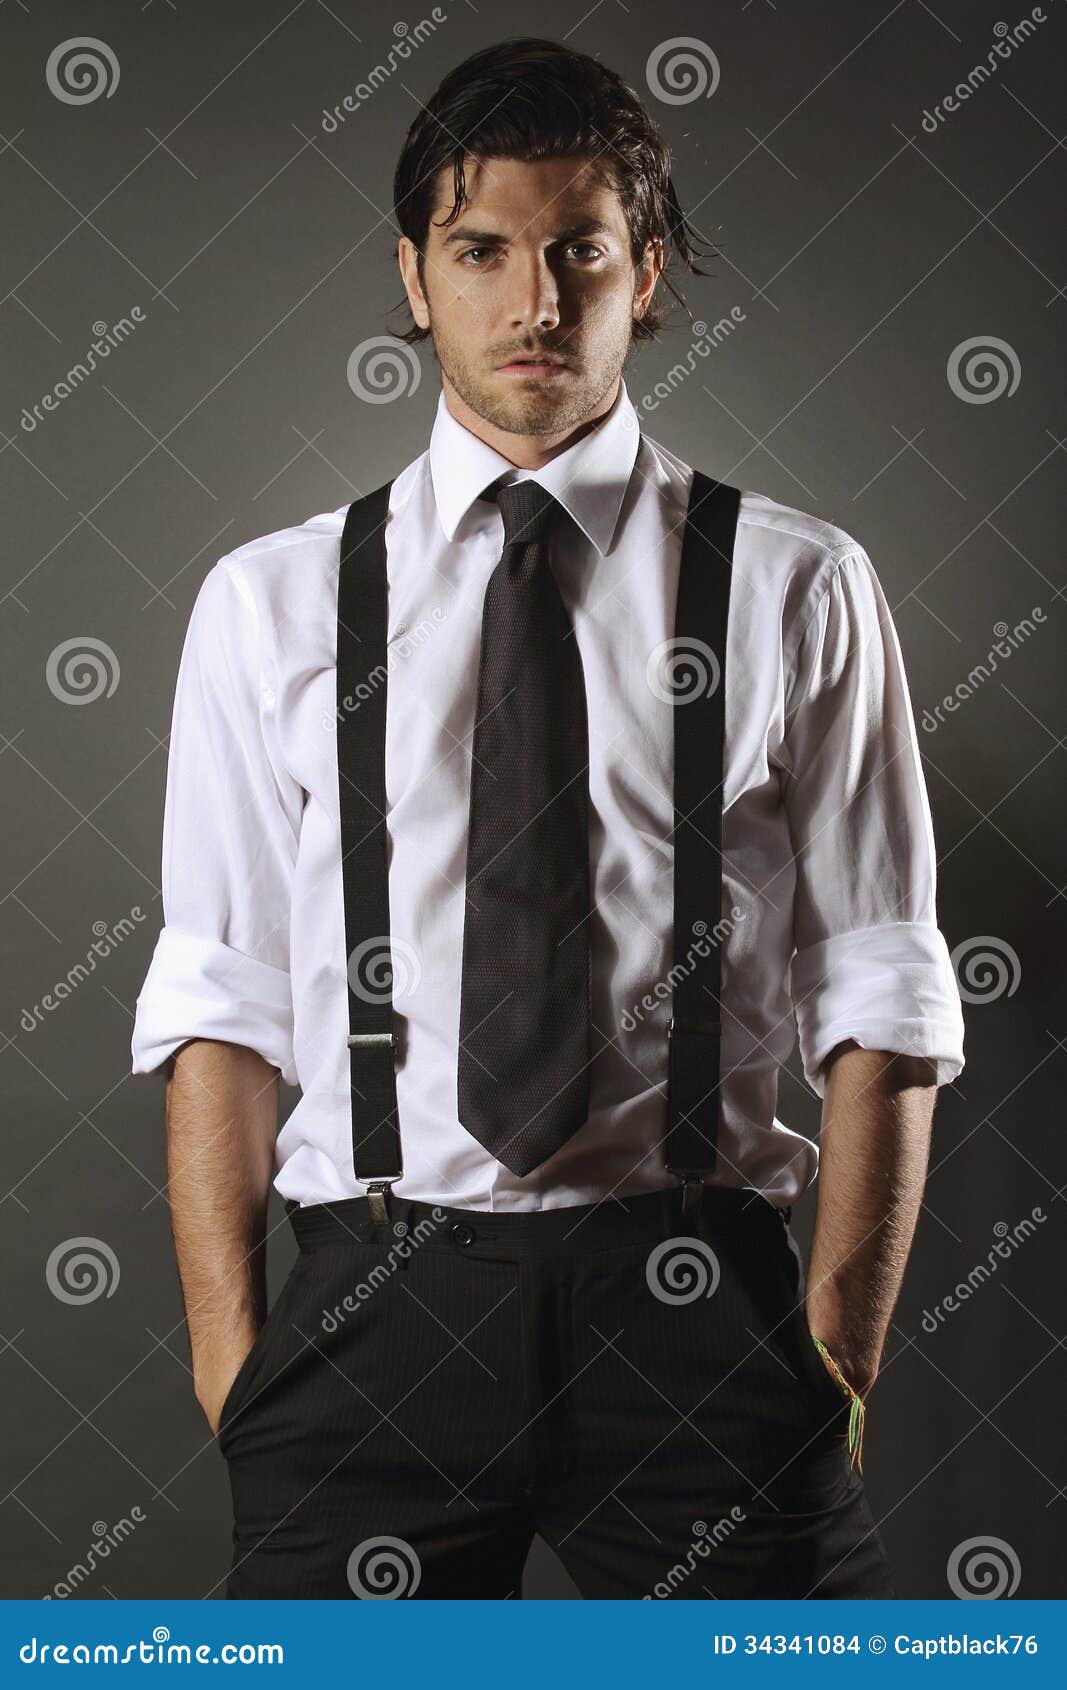 Handsome Fashion Model with Black Tie Stock Photo - Image of model ...